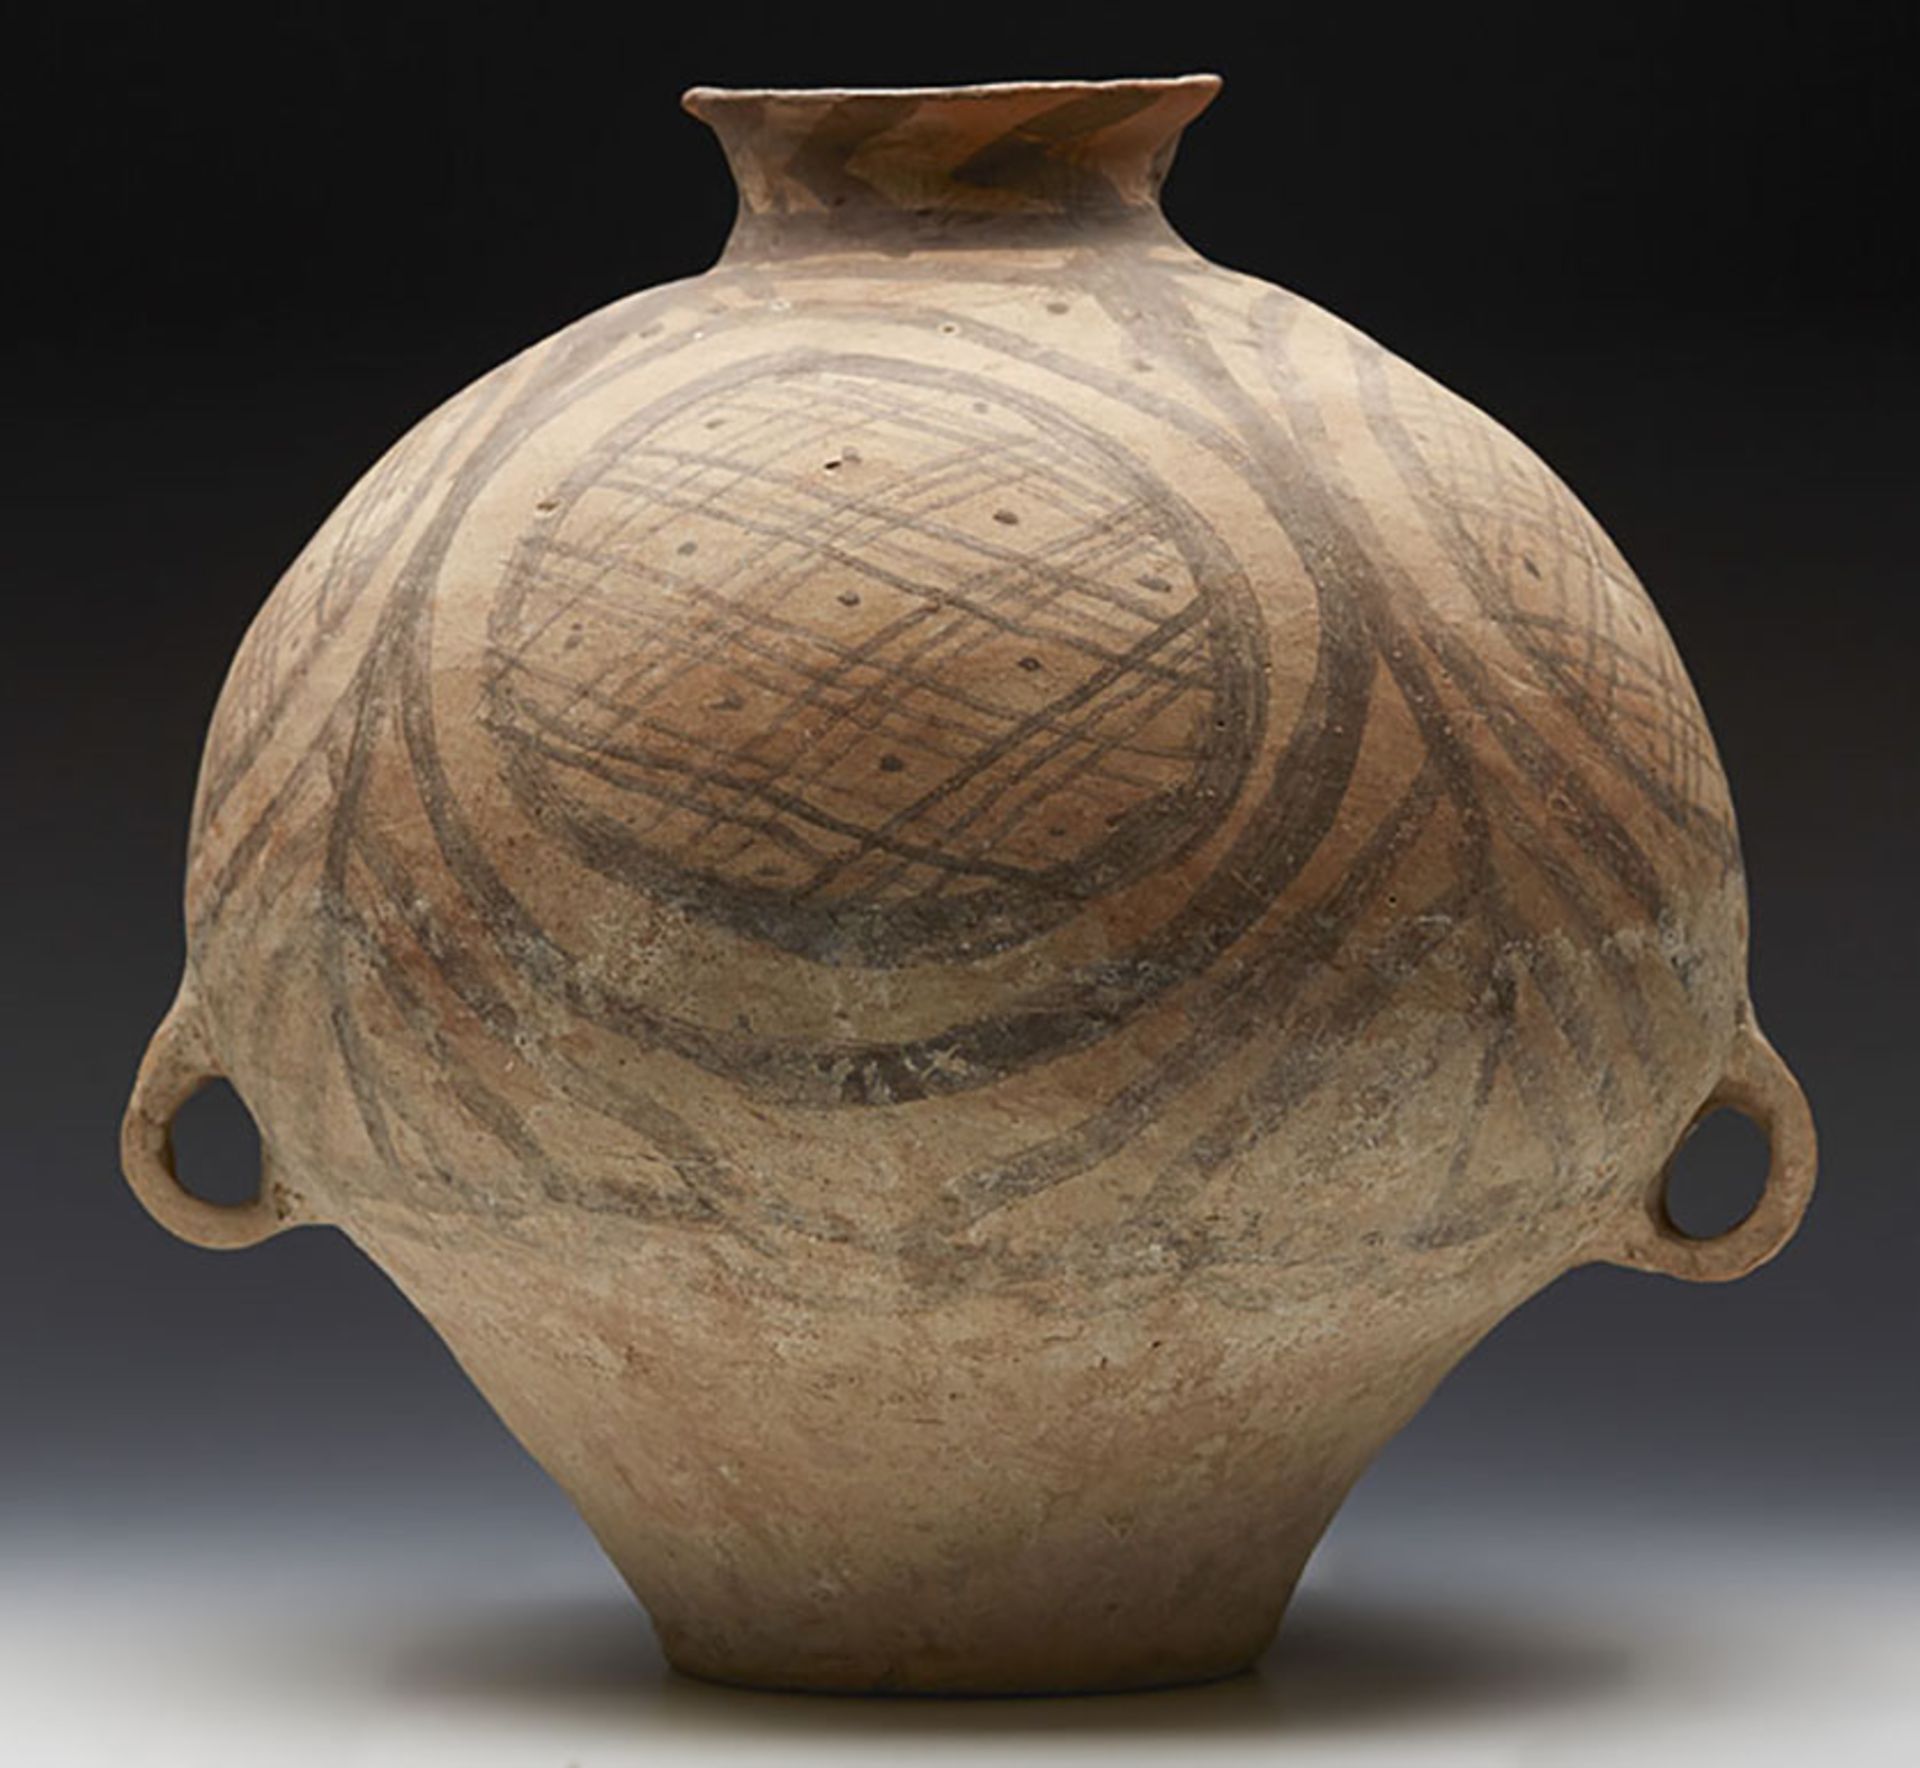 Neolithic Chinese Terracotta Twin Handled Jar 3Rd Millennium Bc - Image 10 of 11